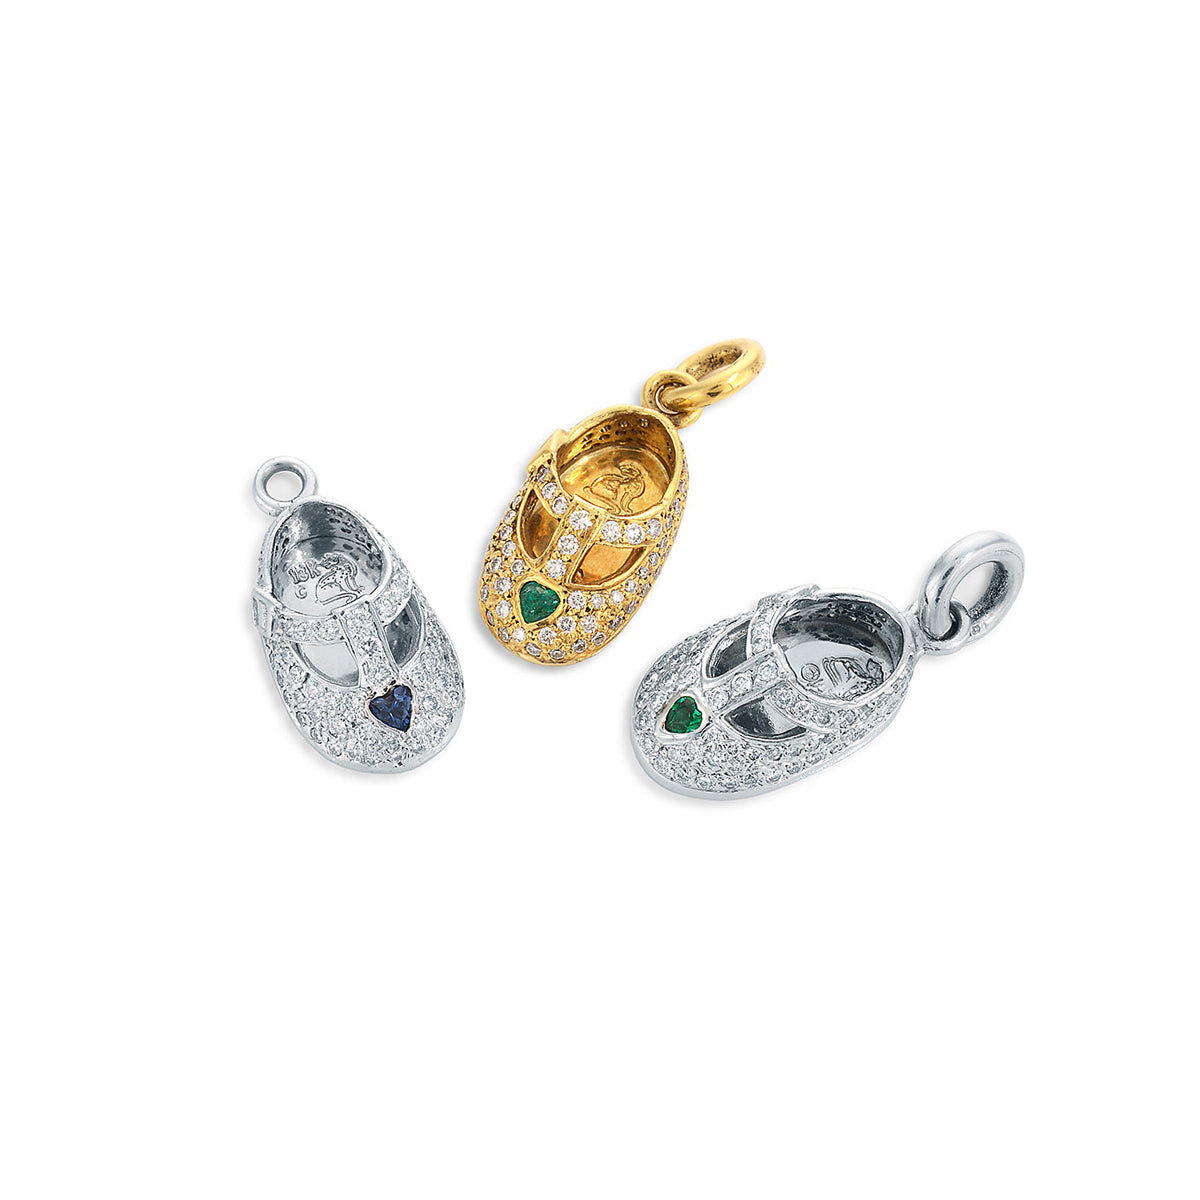 Baby shoe charms featuring heart shaped emerald and sapphires by Chicago's historic family jeweler, Lester Lampert.